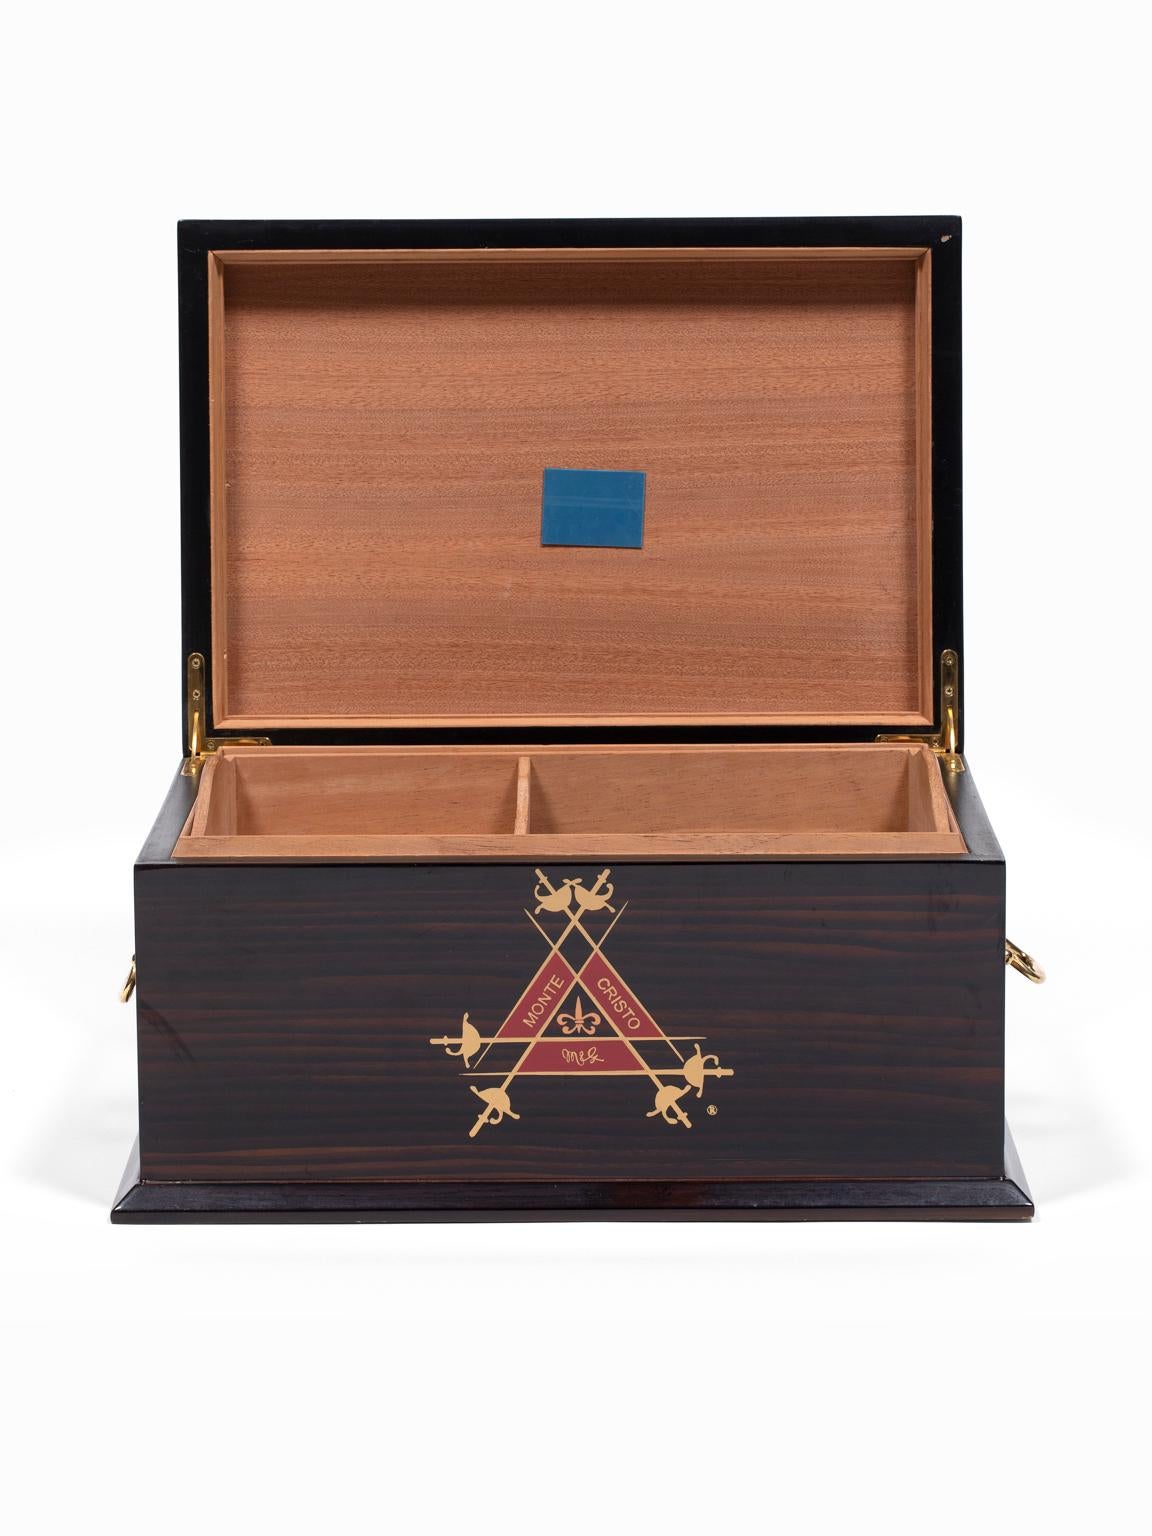 Hand-Crafted Montecristo Cup 2000 Humidor Limited Edition For Sale